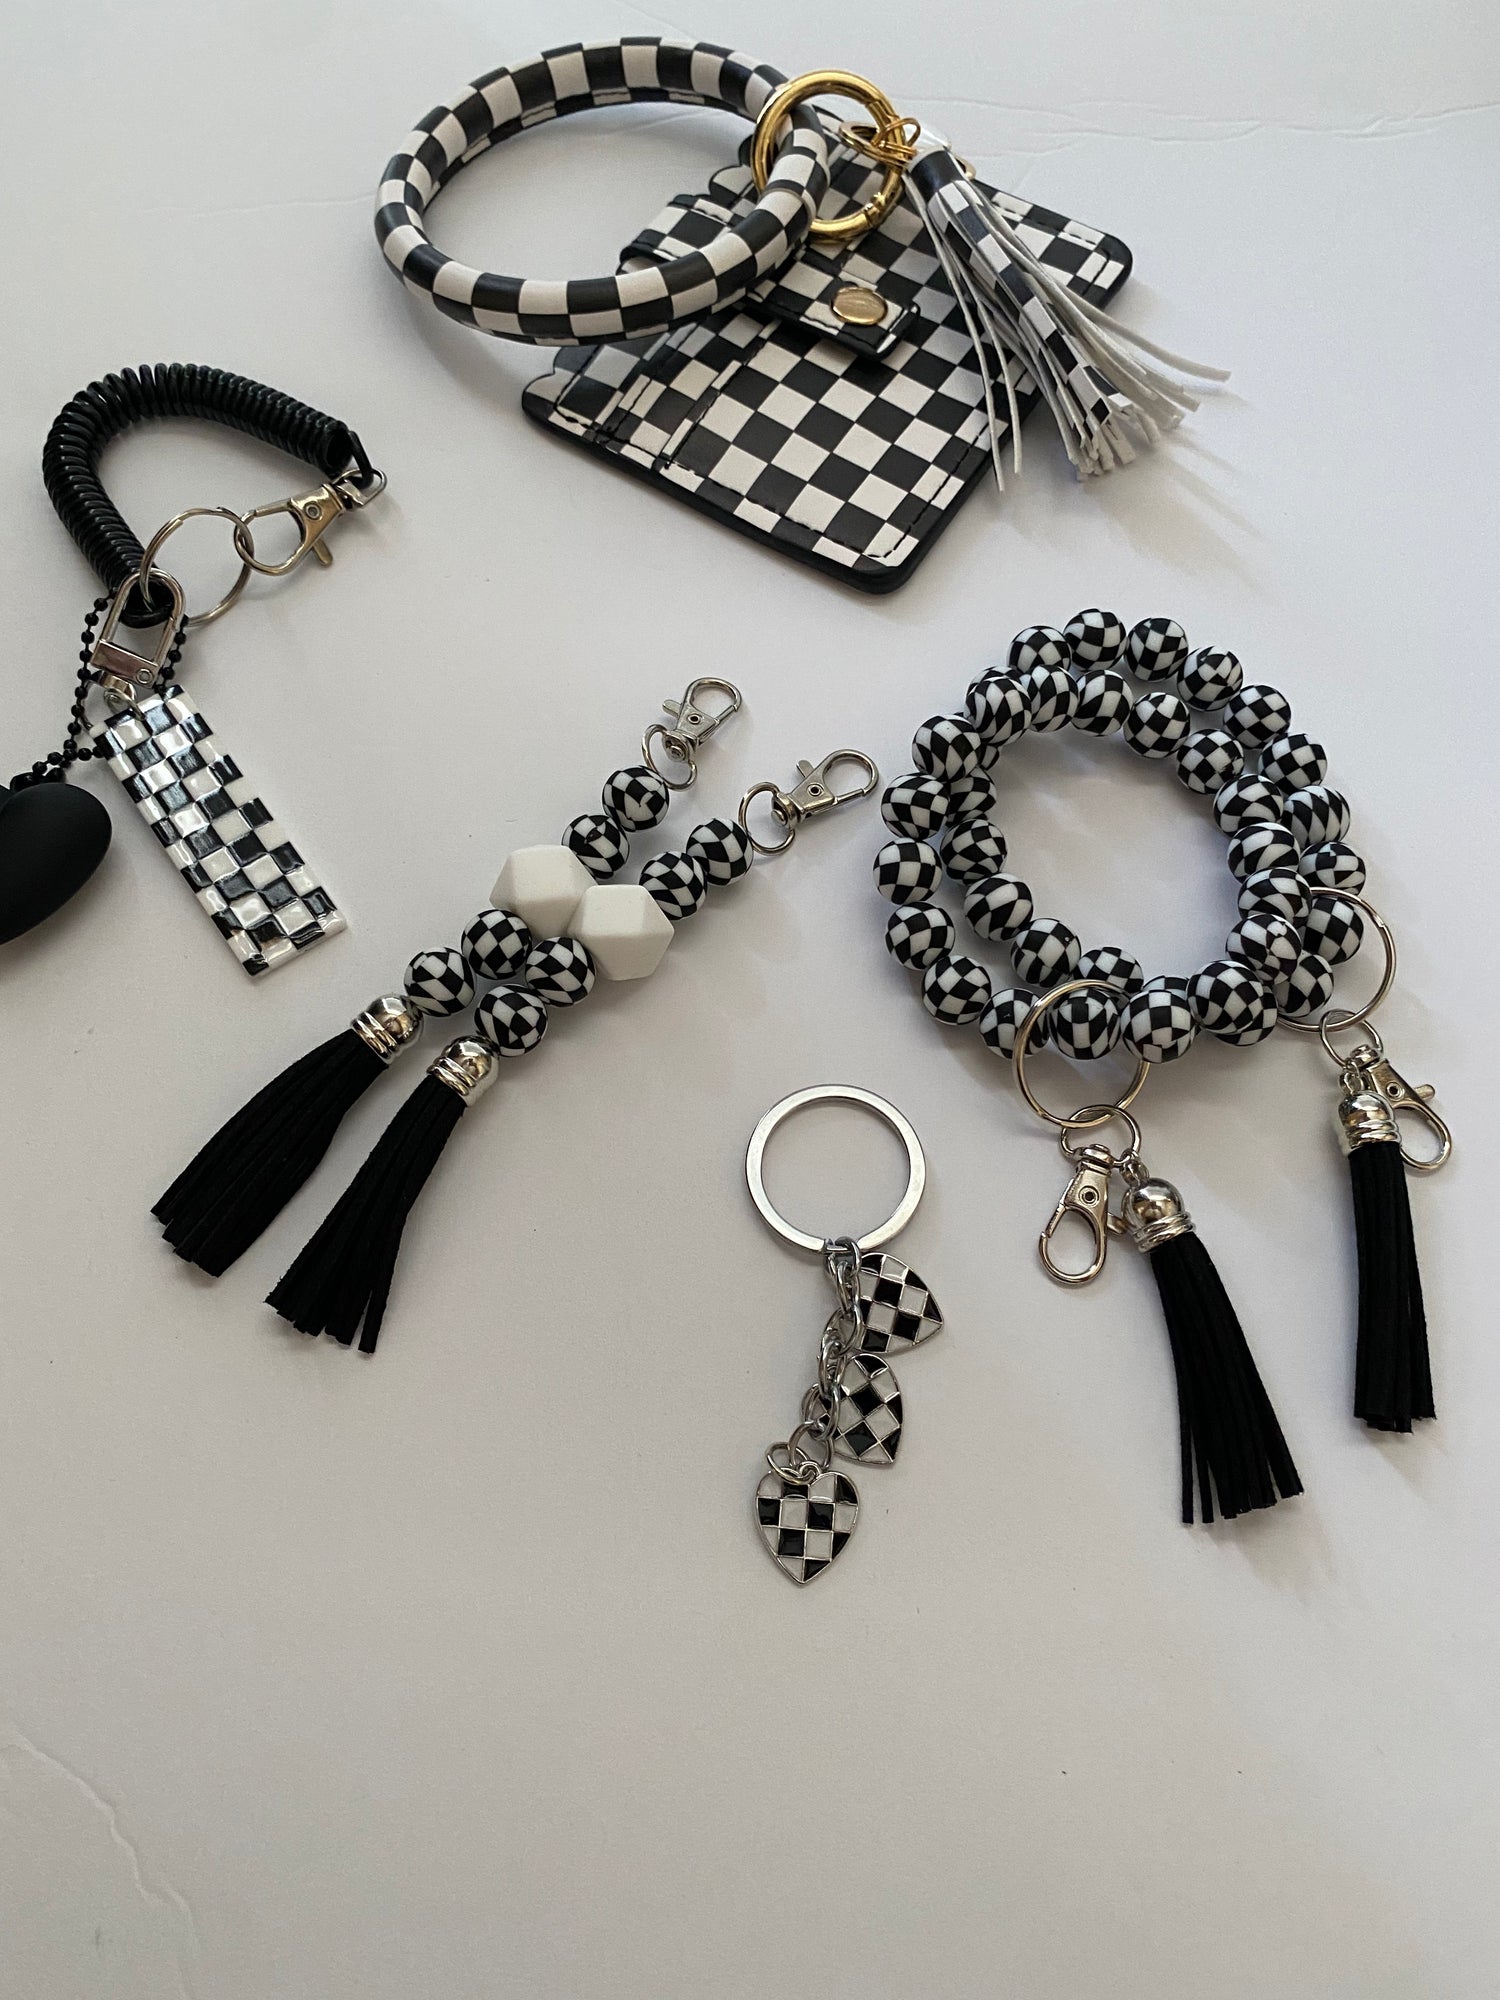 Keychains? Yes, please!